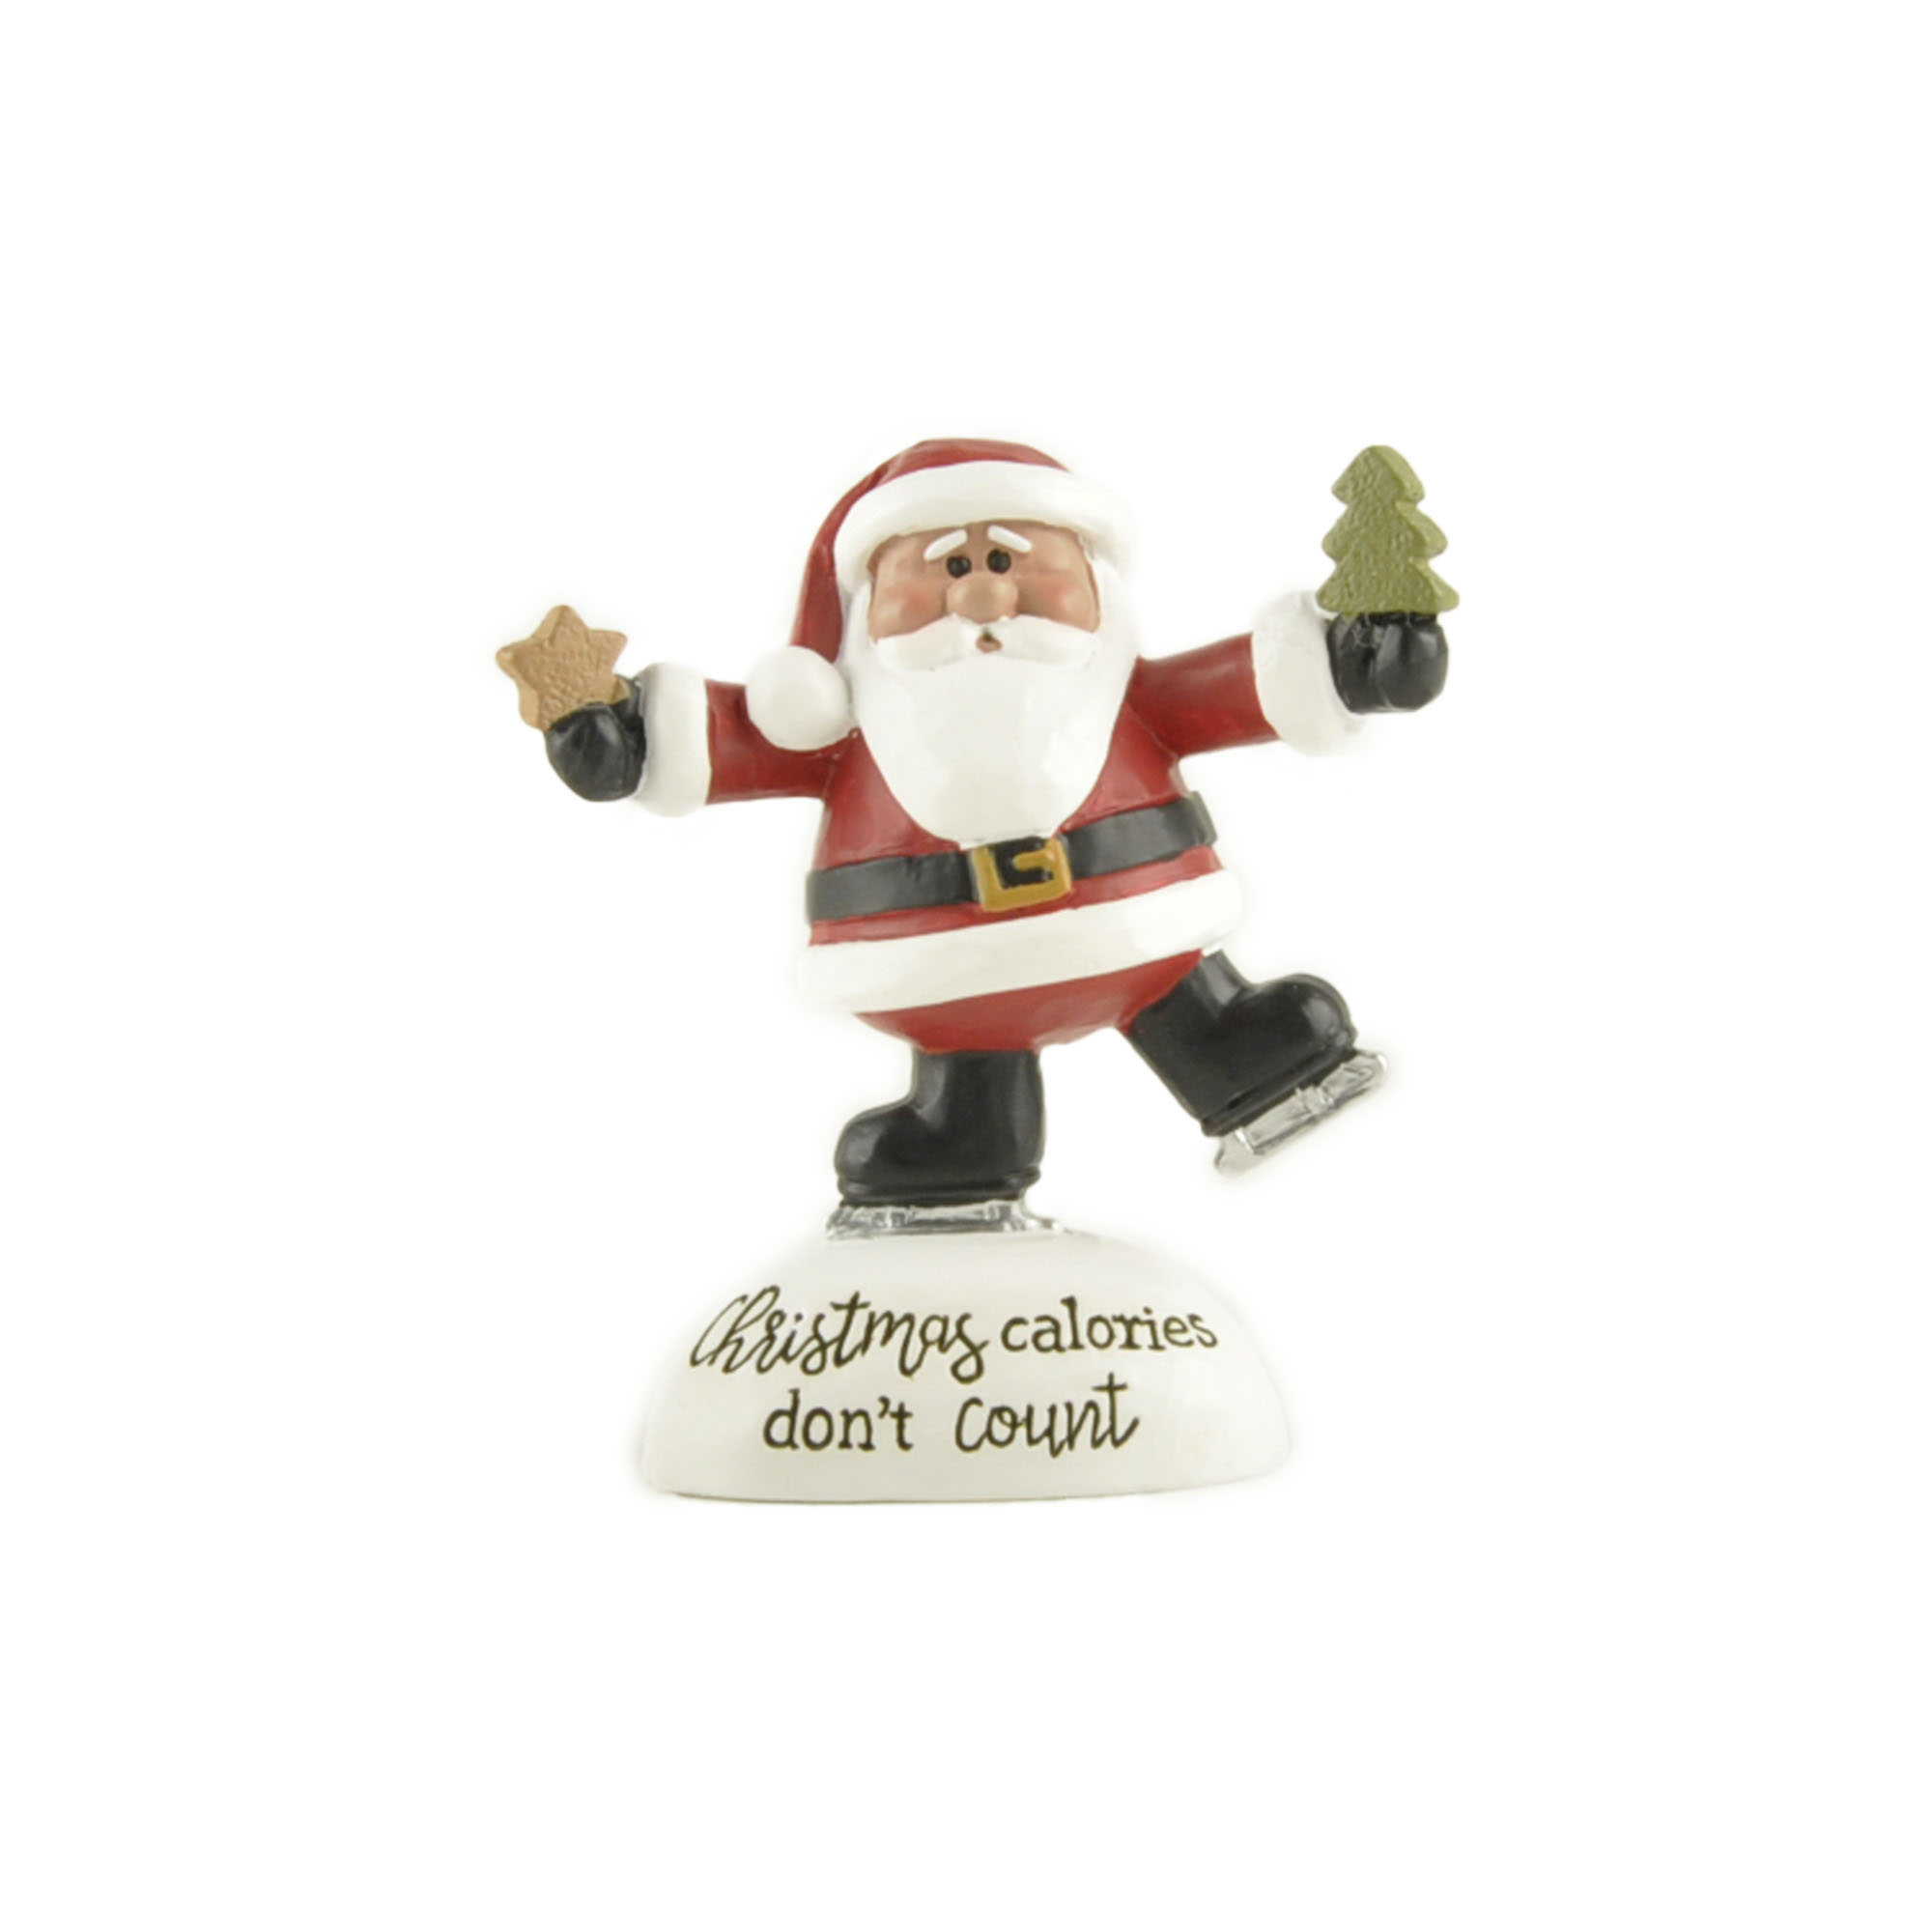 Cheerful Resin Santa Figurine Holding Cookies and Tree – 'Christmas Calories Don't Count' – Playful Holiday Decoration 238-13913